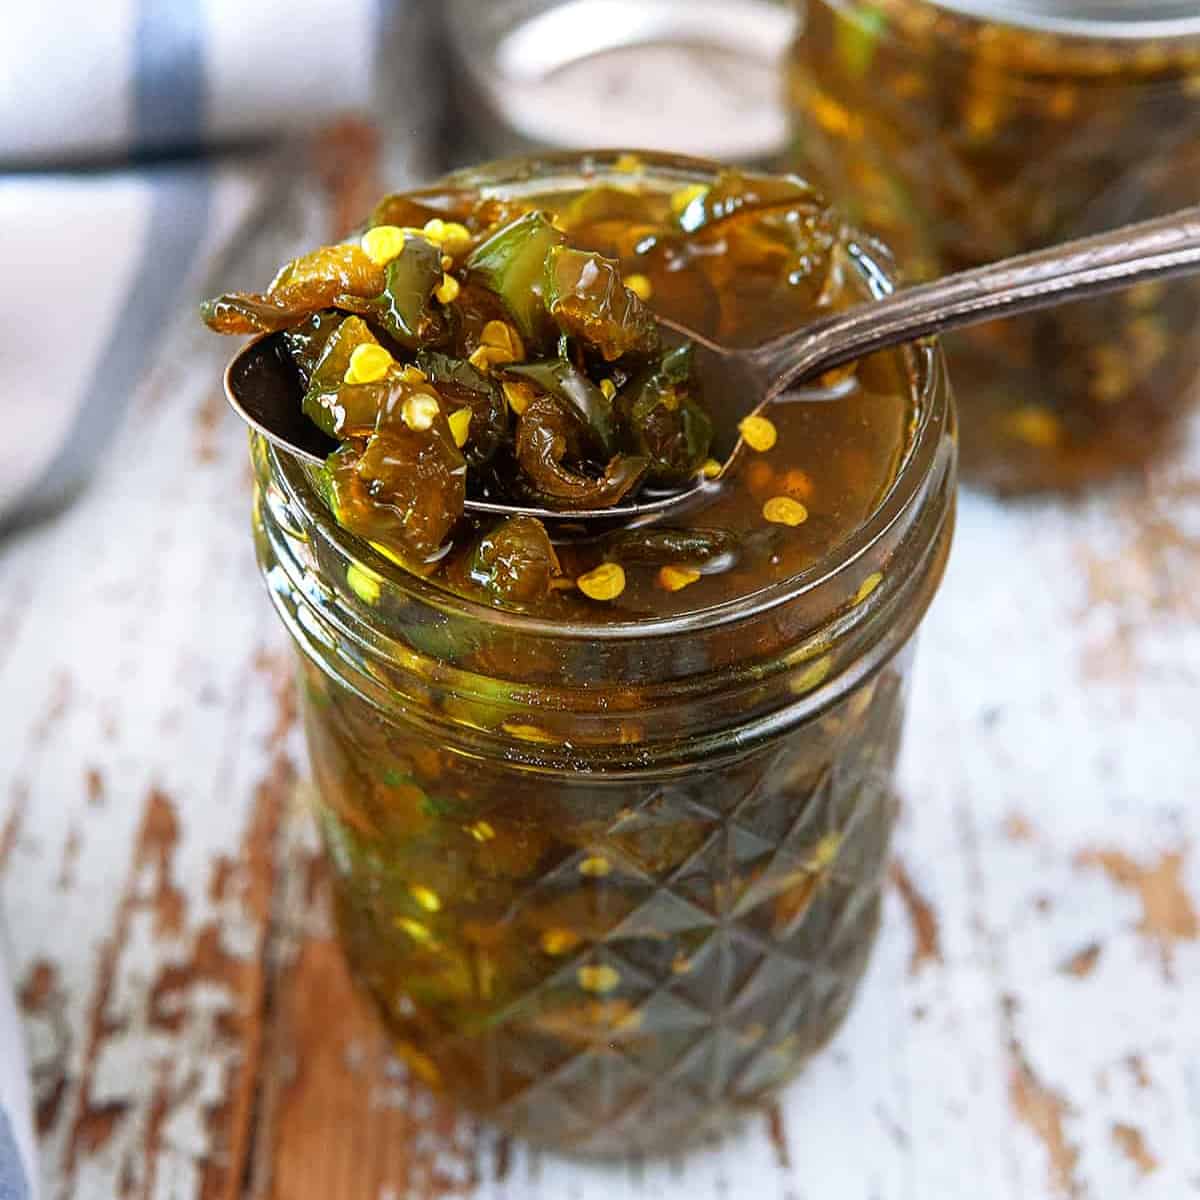 Taking a spoonful of candied jalapenos from a jar